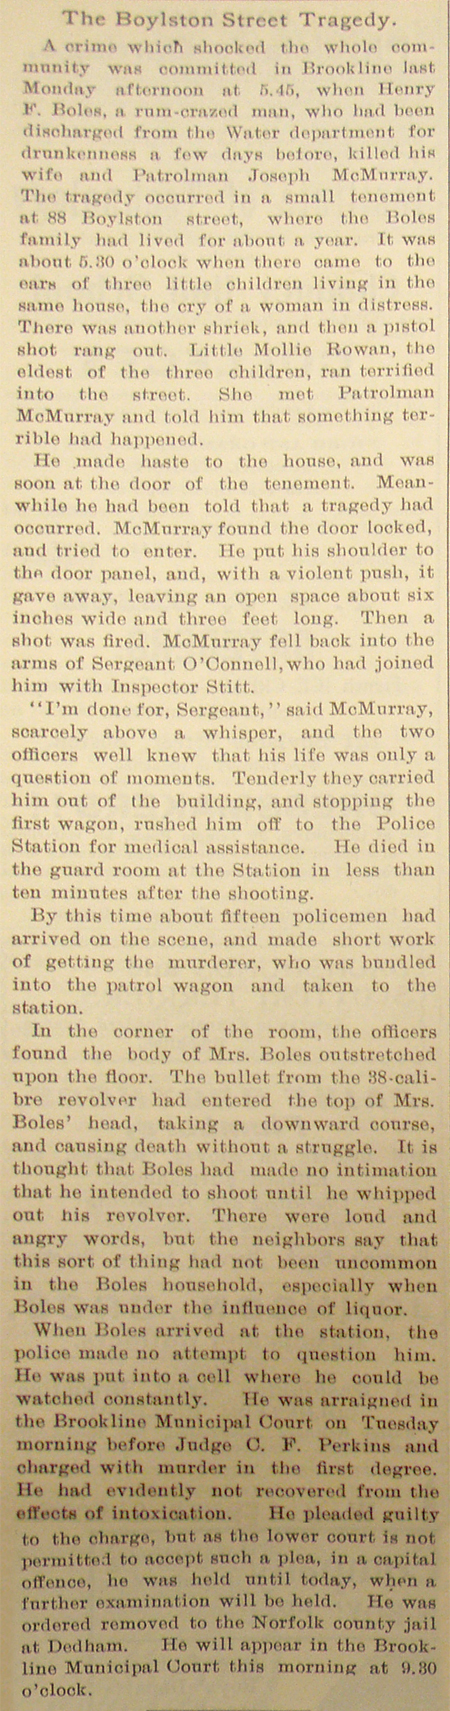 McMurray Murder Article